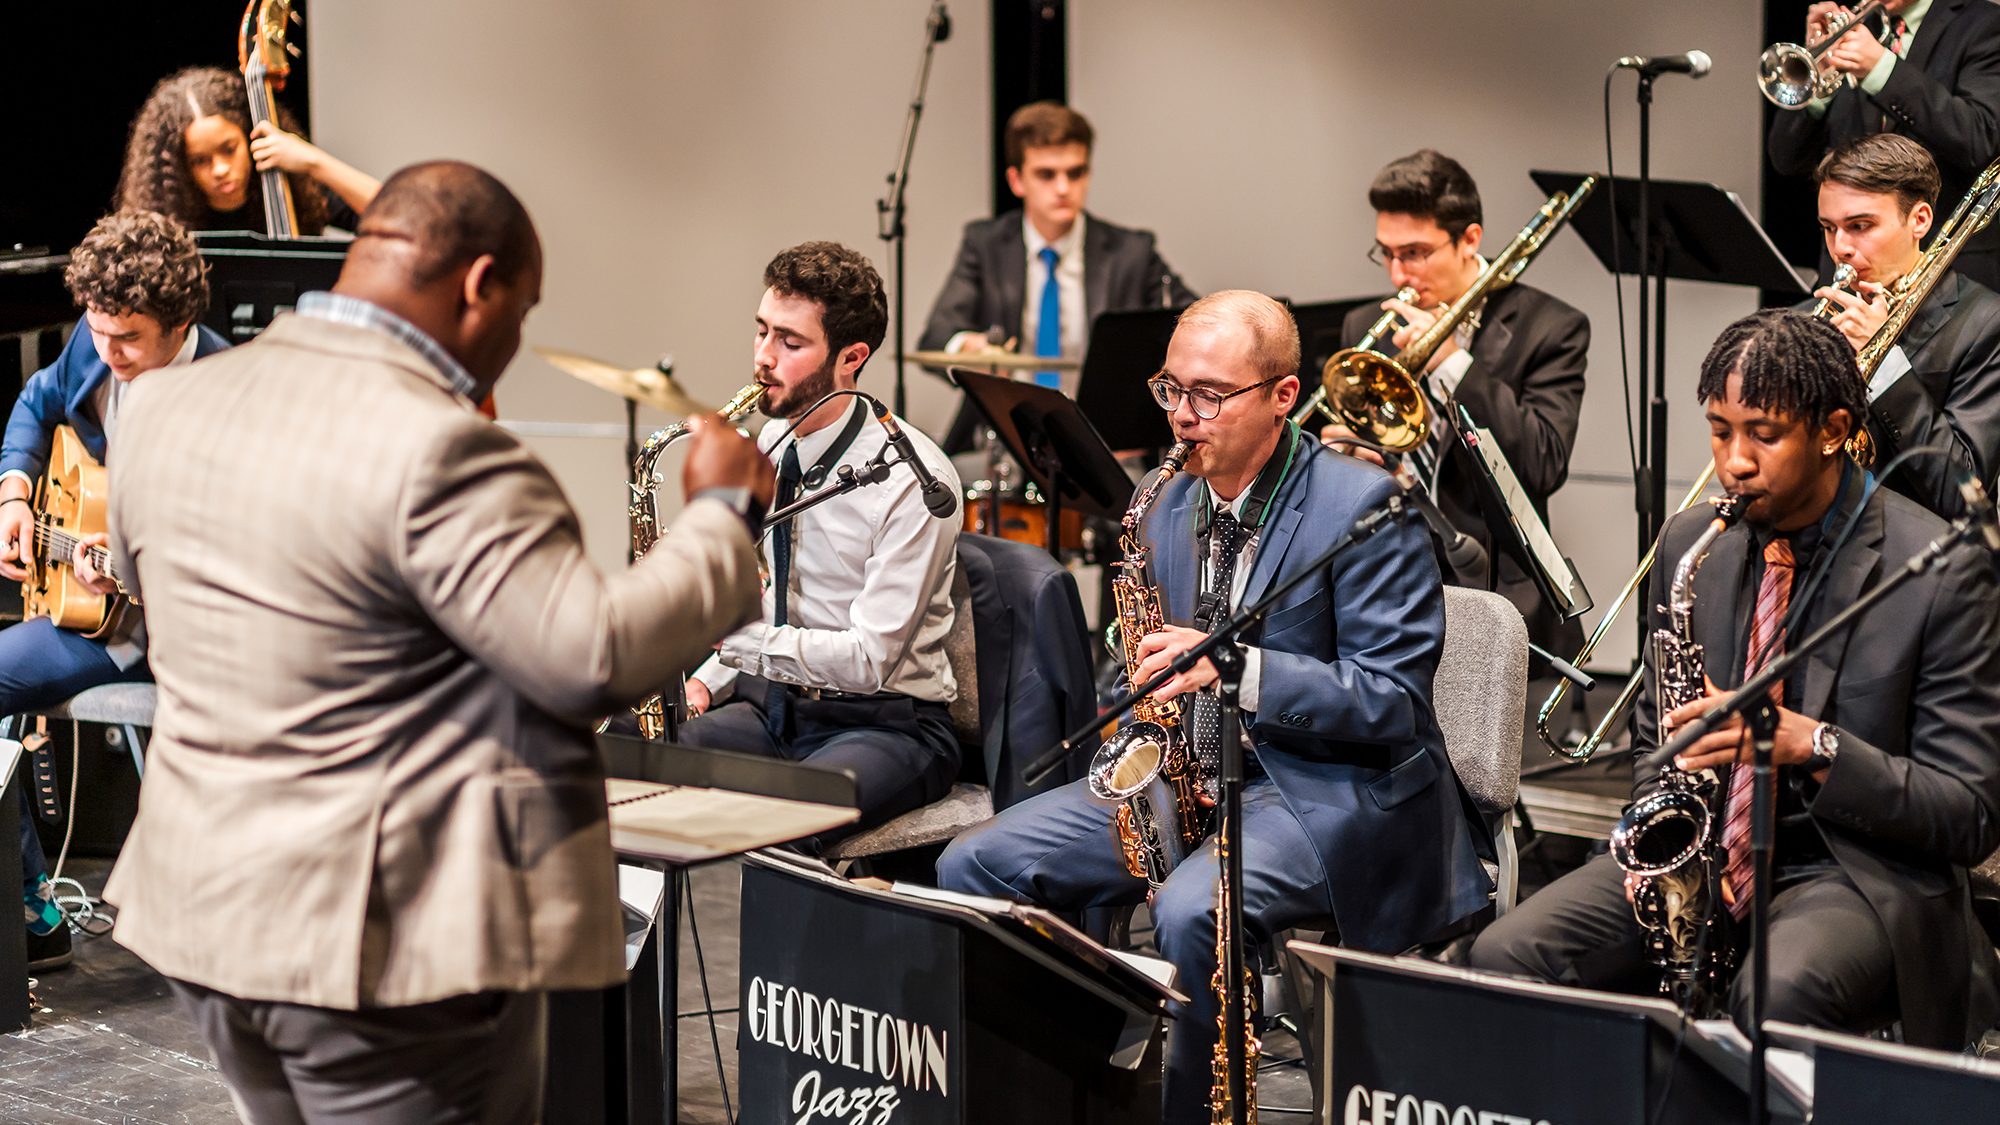 Prof. Paul Bratcher conducts the GU Jazz Ensemble students, including bass player at left, saxophones to right.